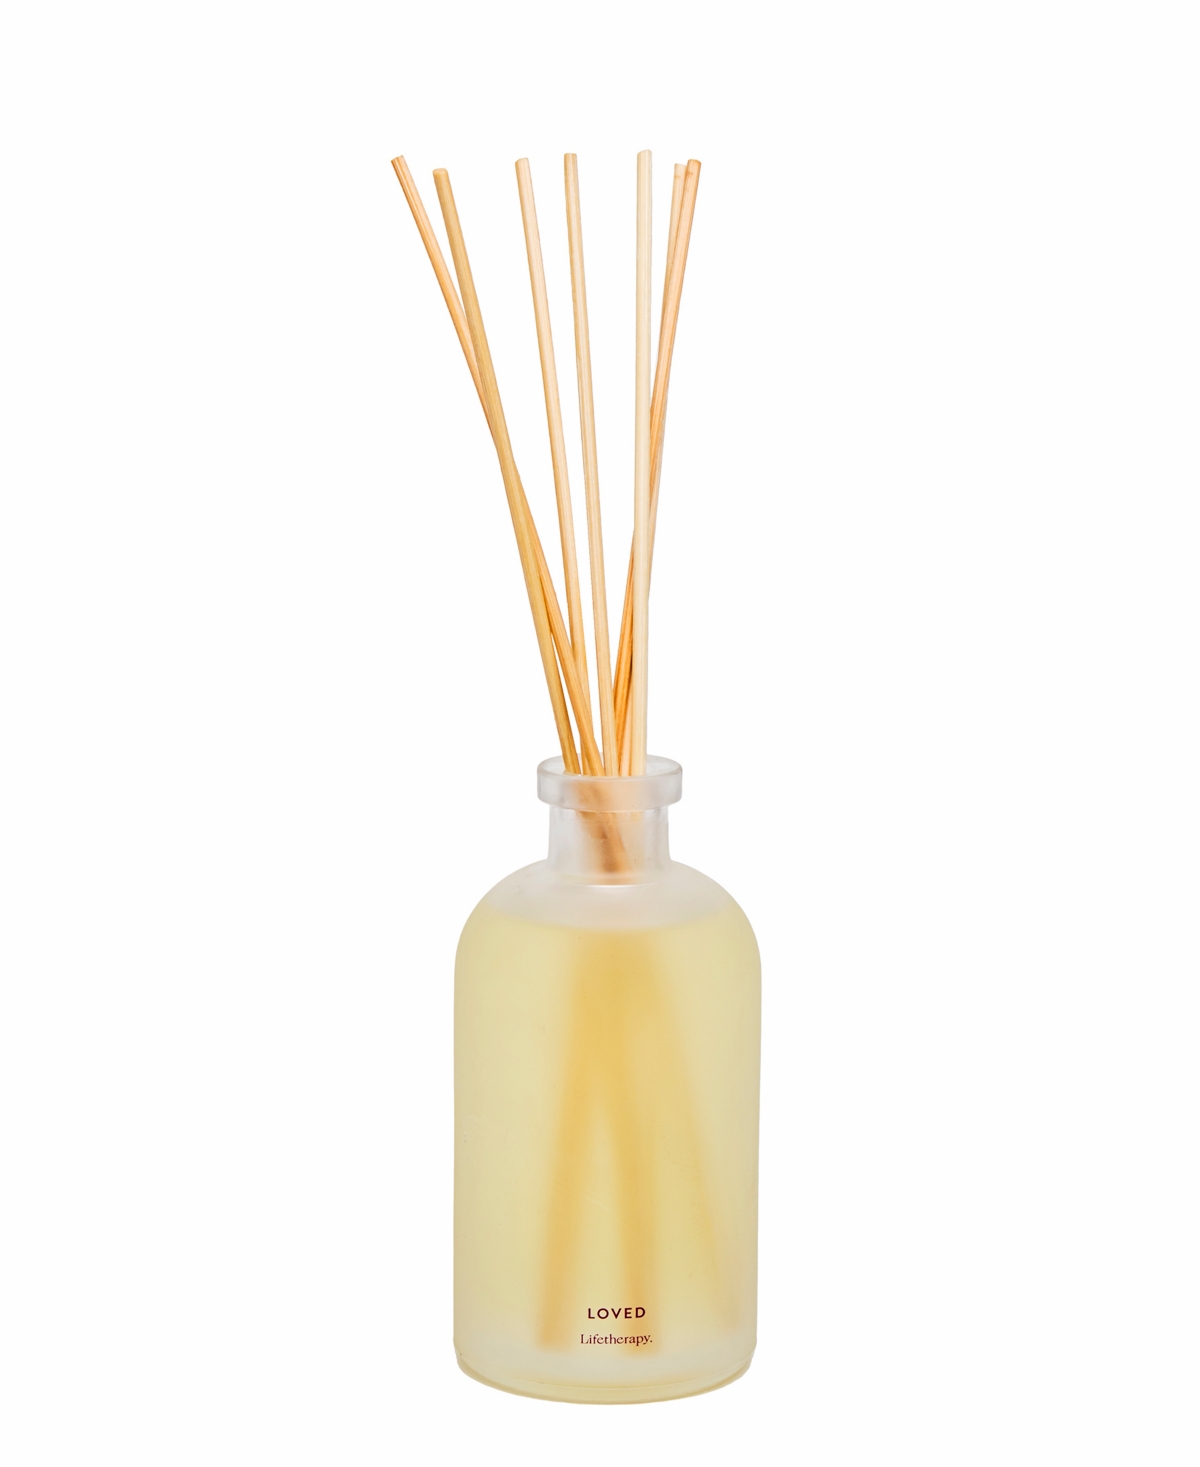 Women's Loved Reed Diffuser, 8 fl oz